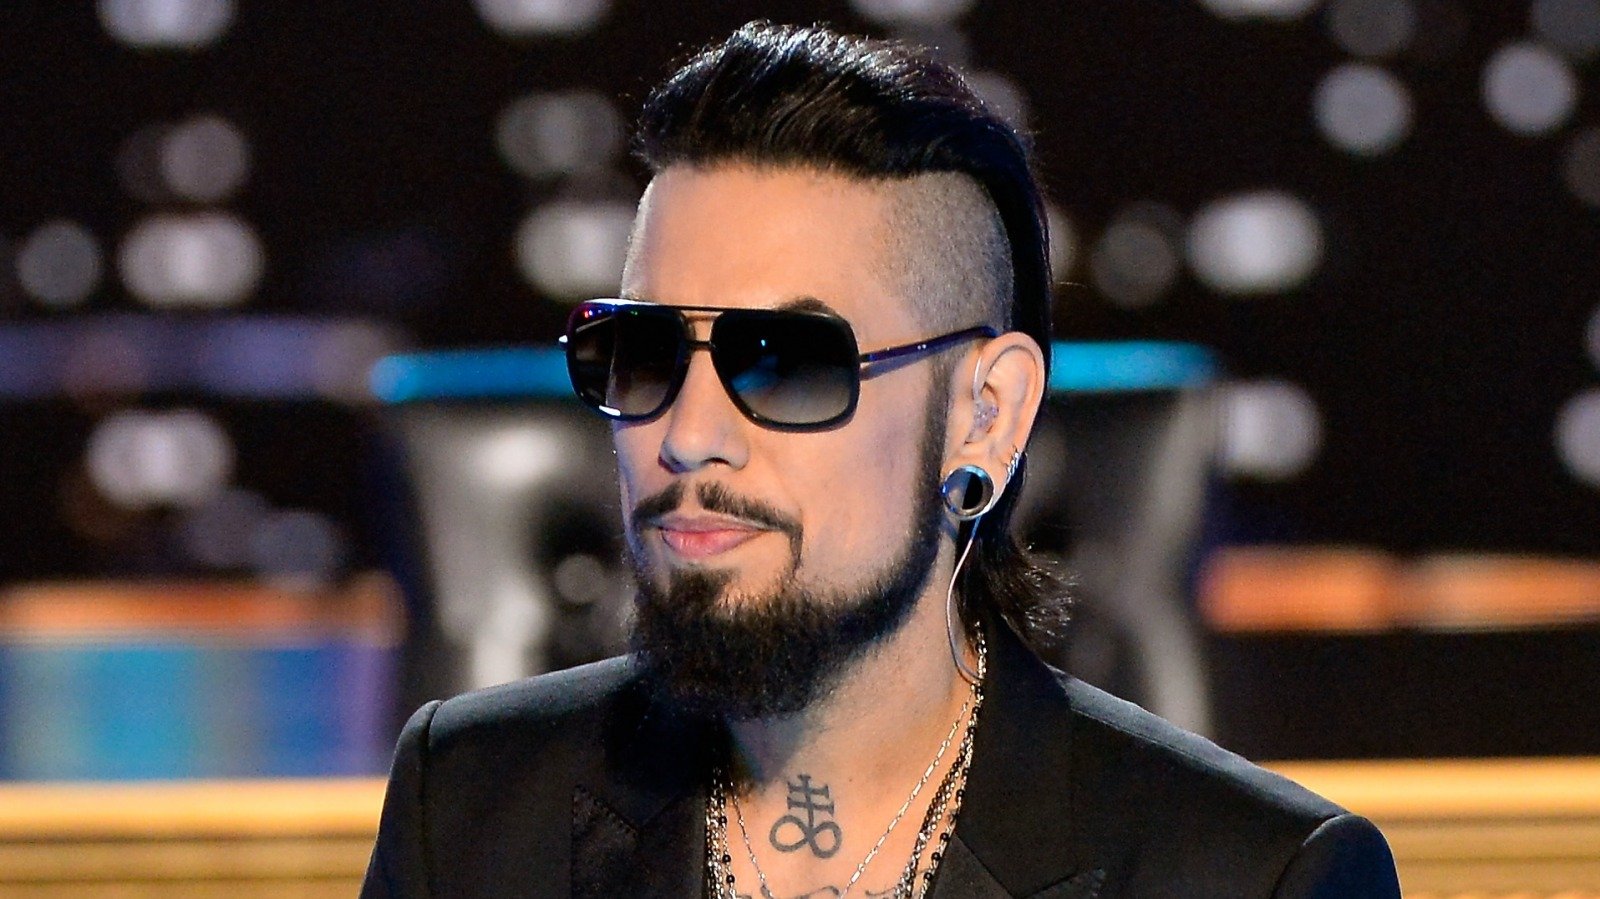 You Wouldn't Want To Meet Jane's Addiction's Dave Navarro. Here's Why